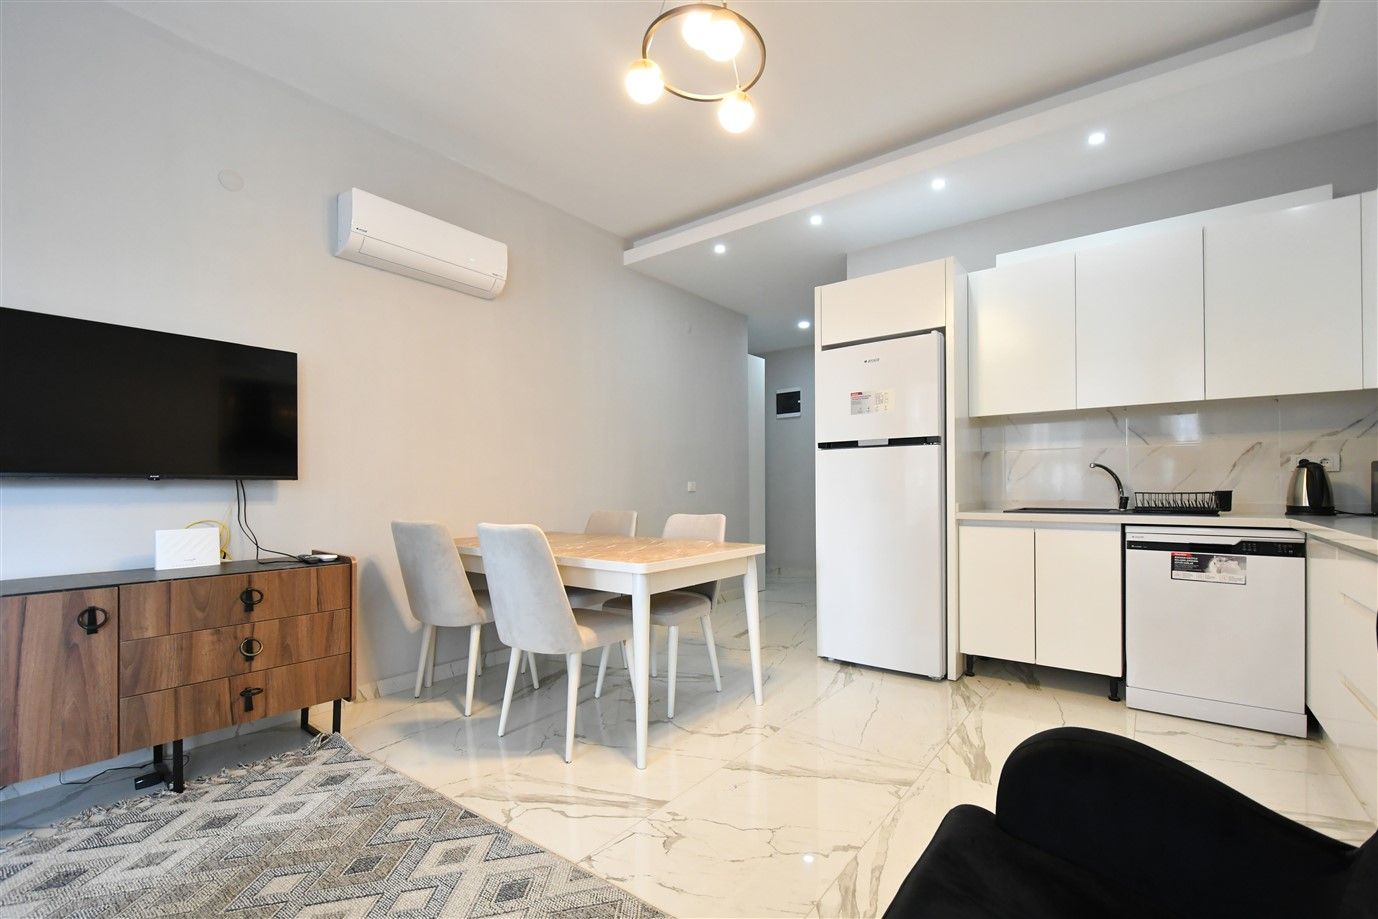 2-bedrooms apartment for rent near the new shopping center in Mahmutlar